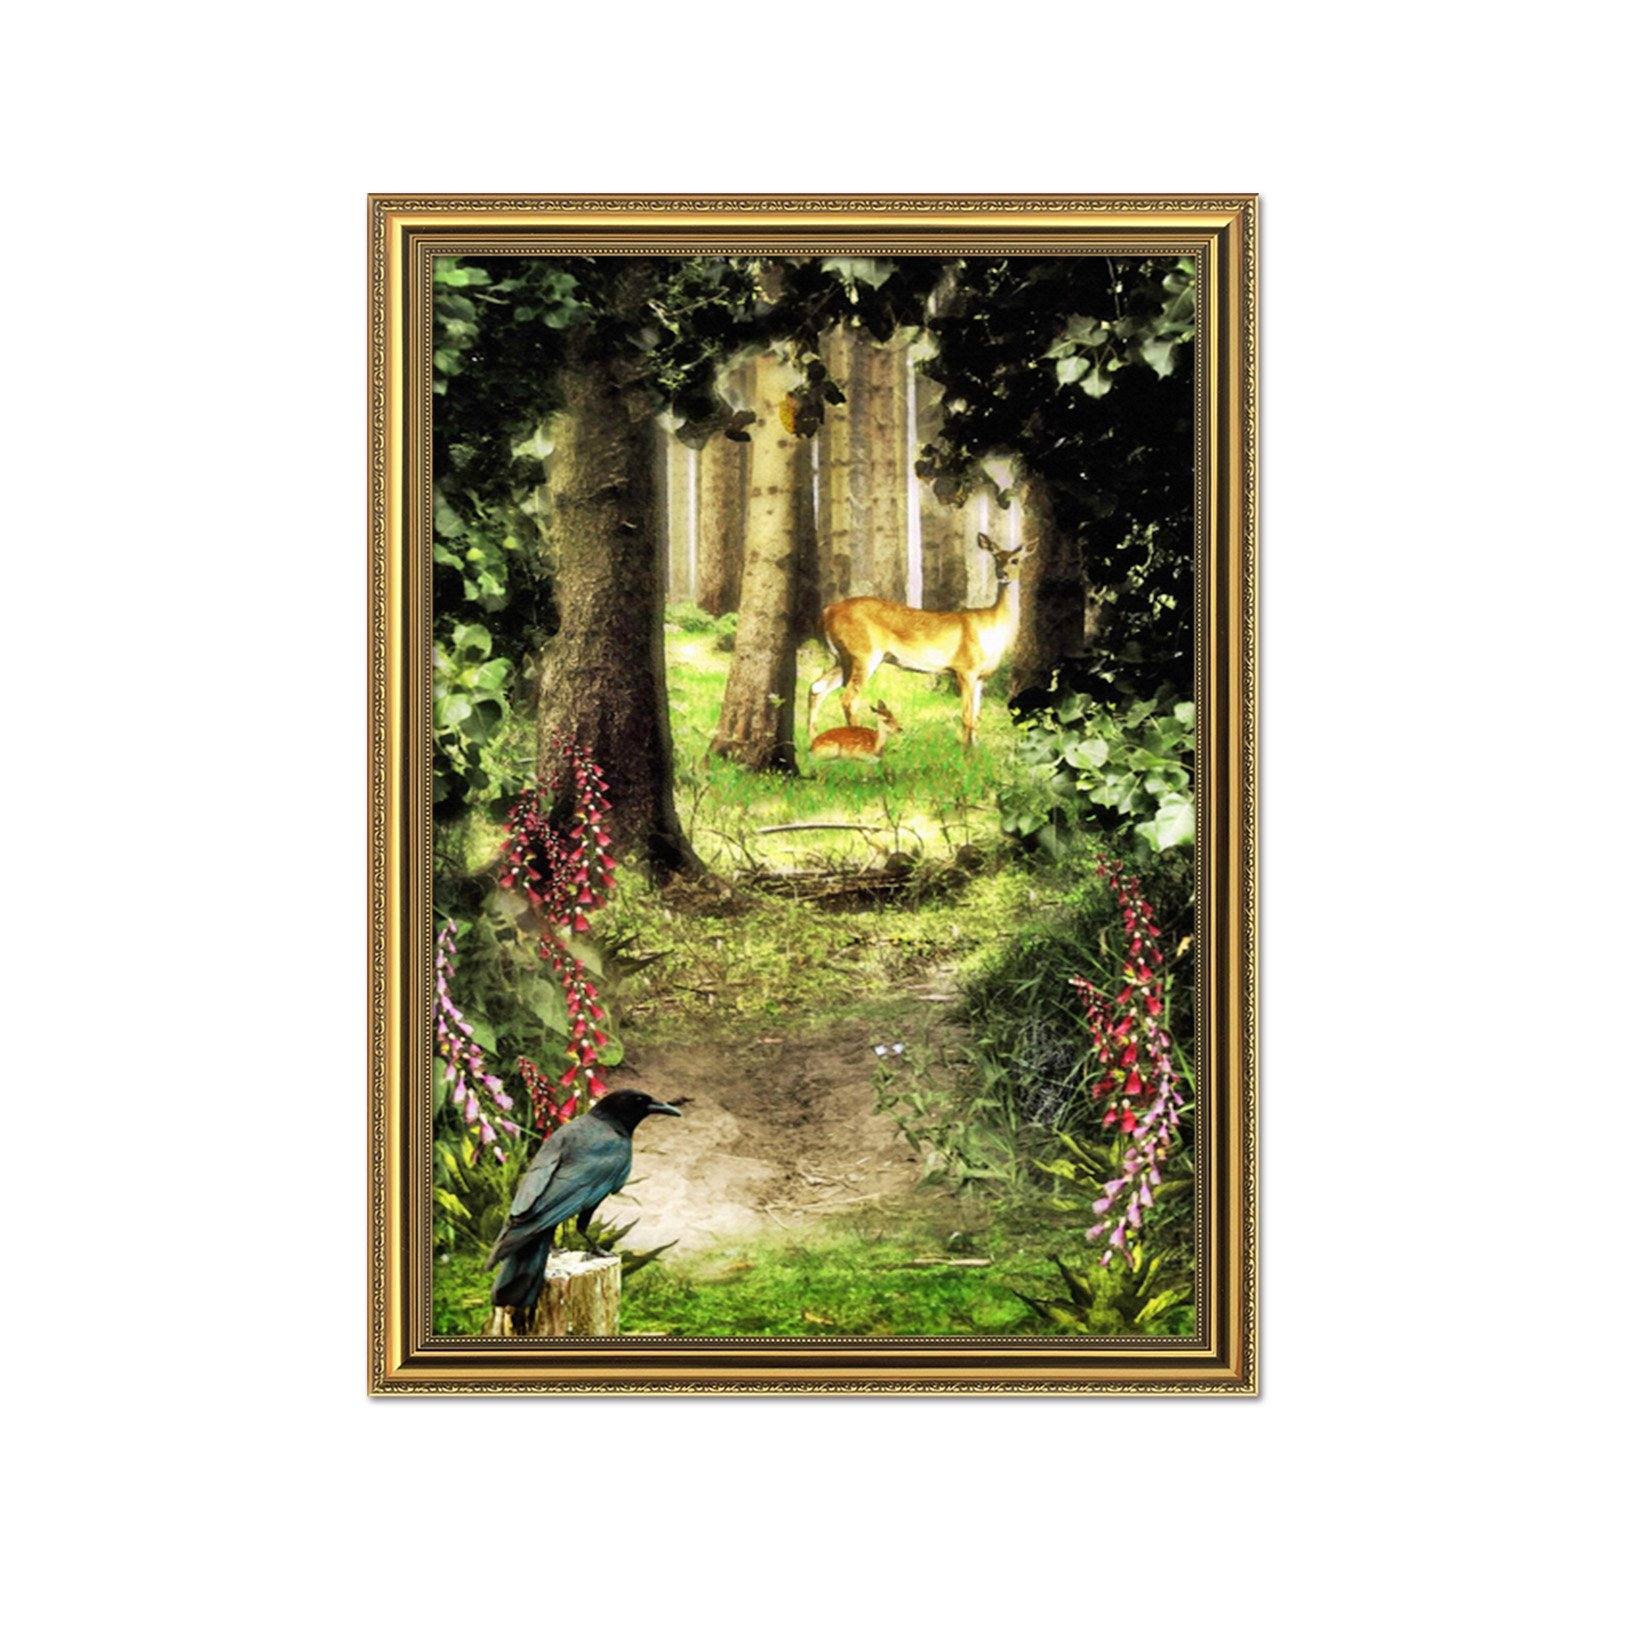 3D Forest Animals 124 Fake Framed Print Painting Wallpaper AJ Creativity Home 